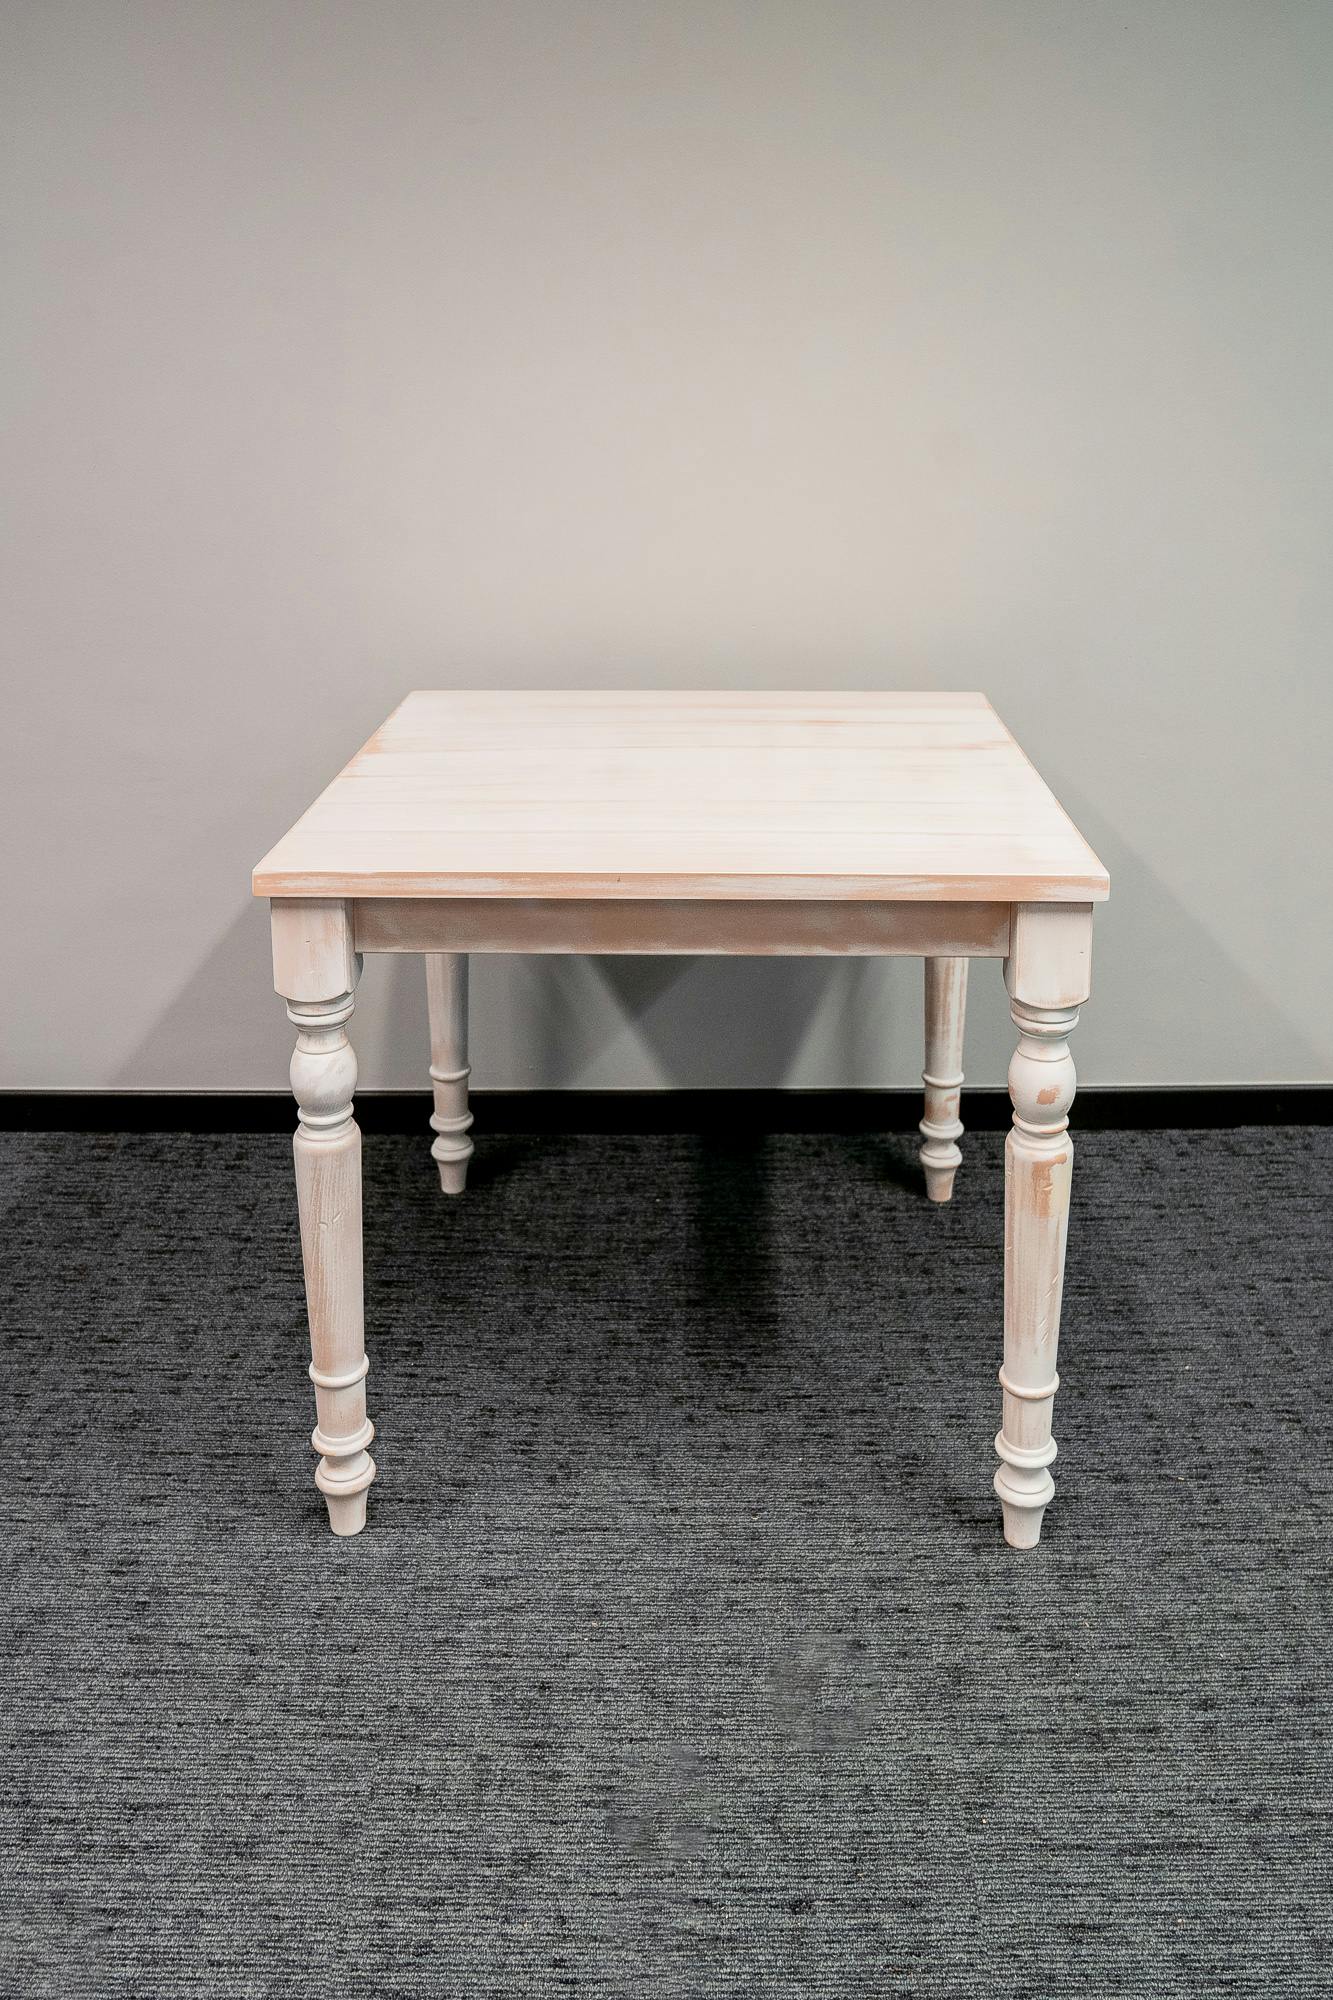 Square wooden table - Second hand quality "Tables" - Relieve Furniture